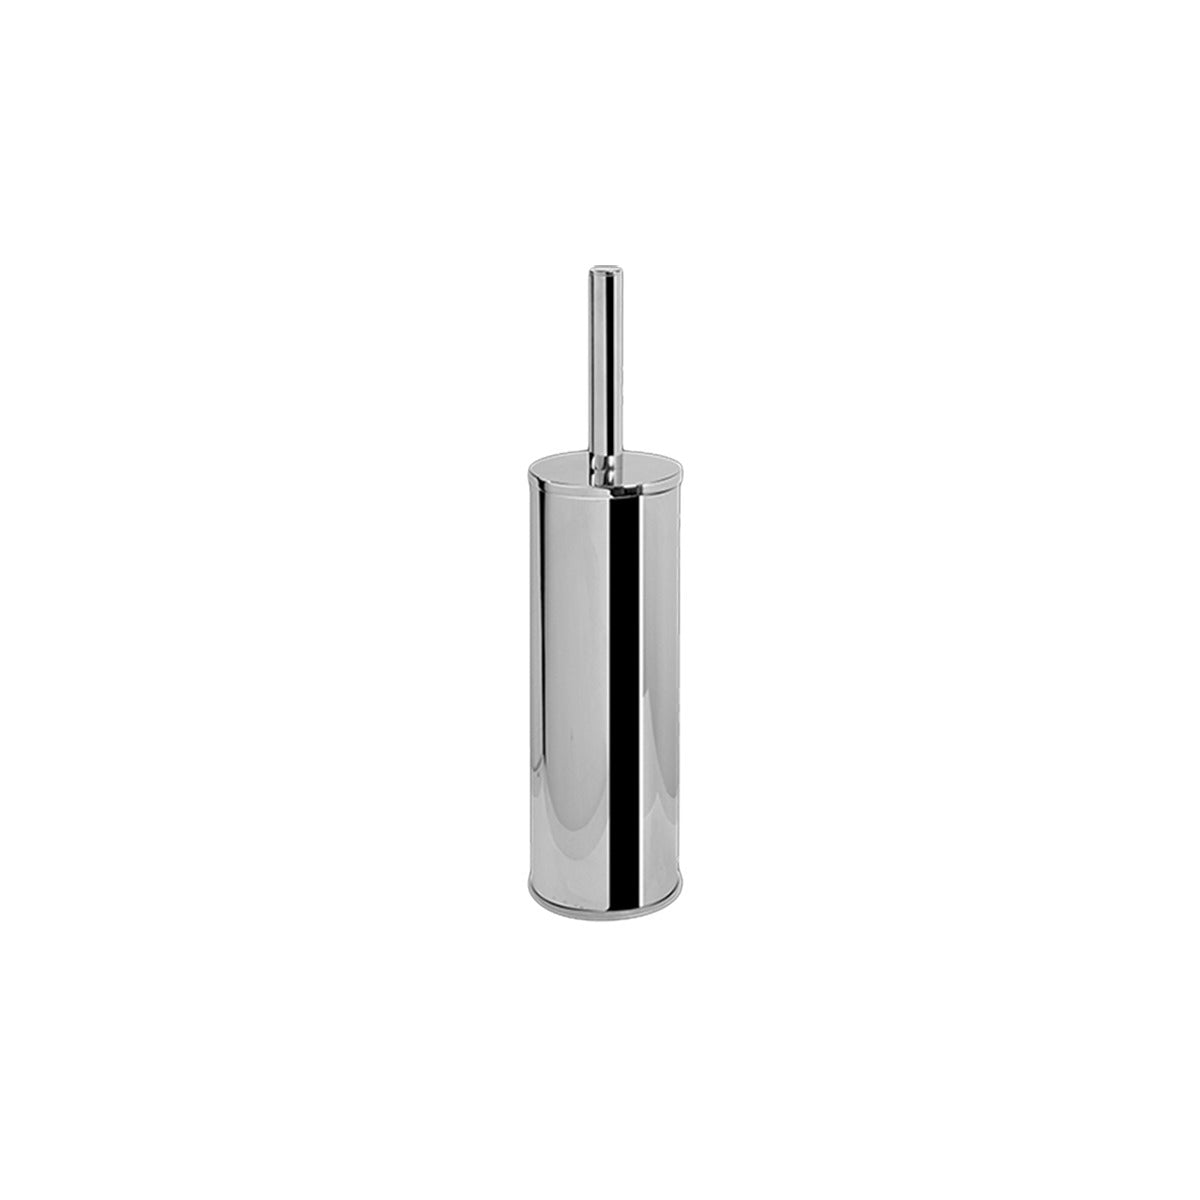 Graff Luna Free Standing Toilet Brush, Available in Polished Chrome & Satin Nickel. Please see order options